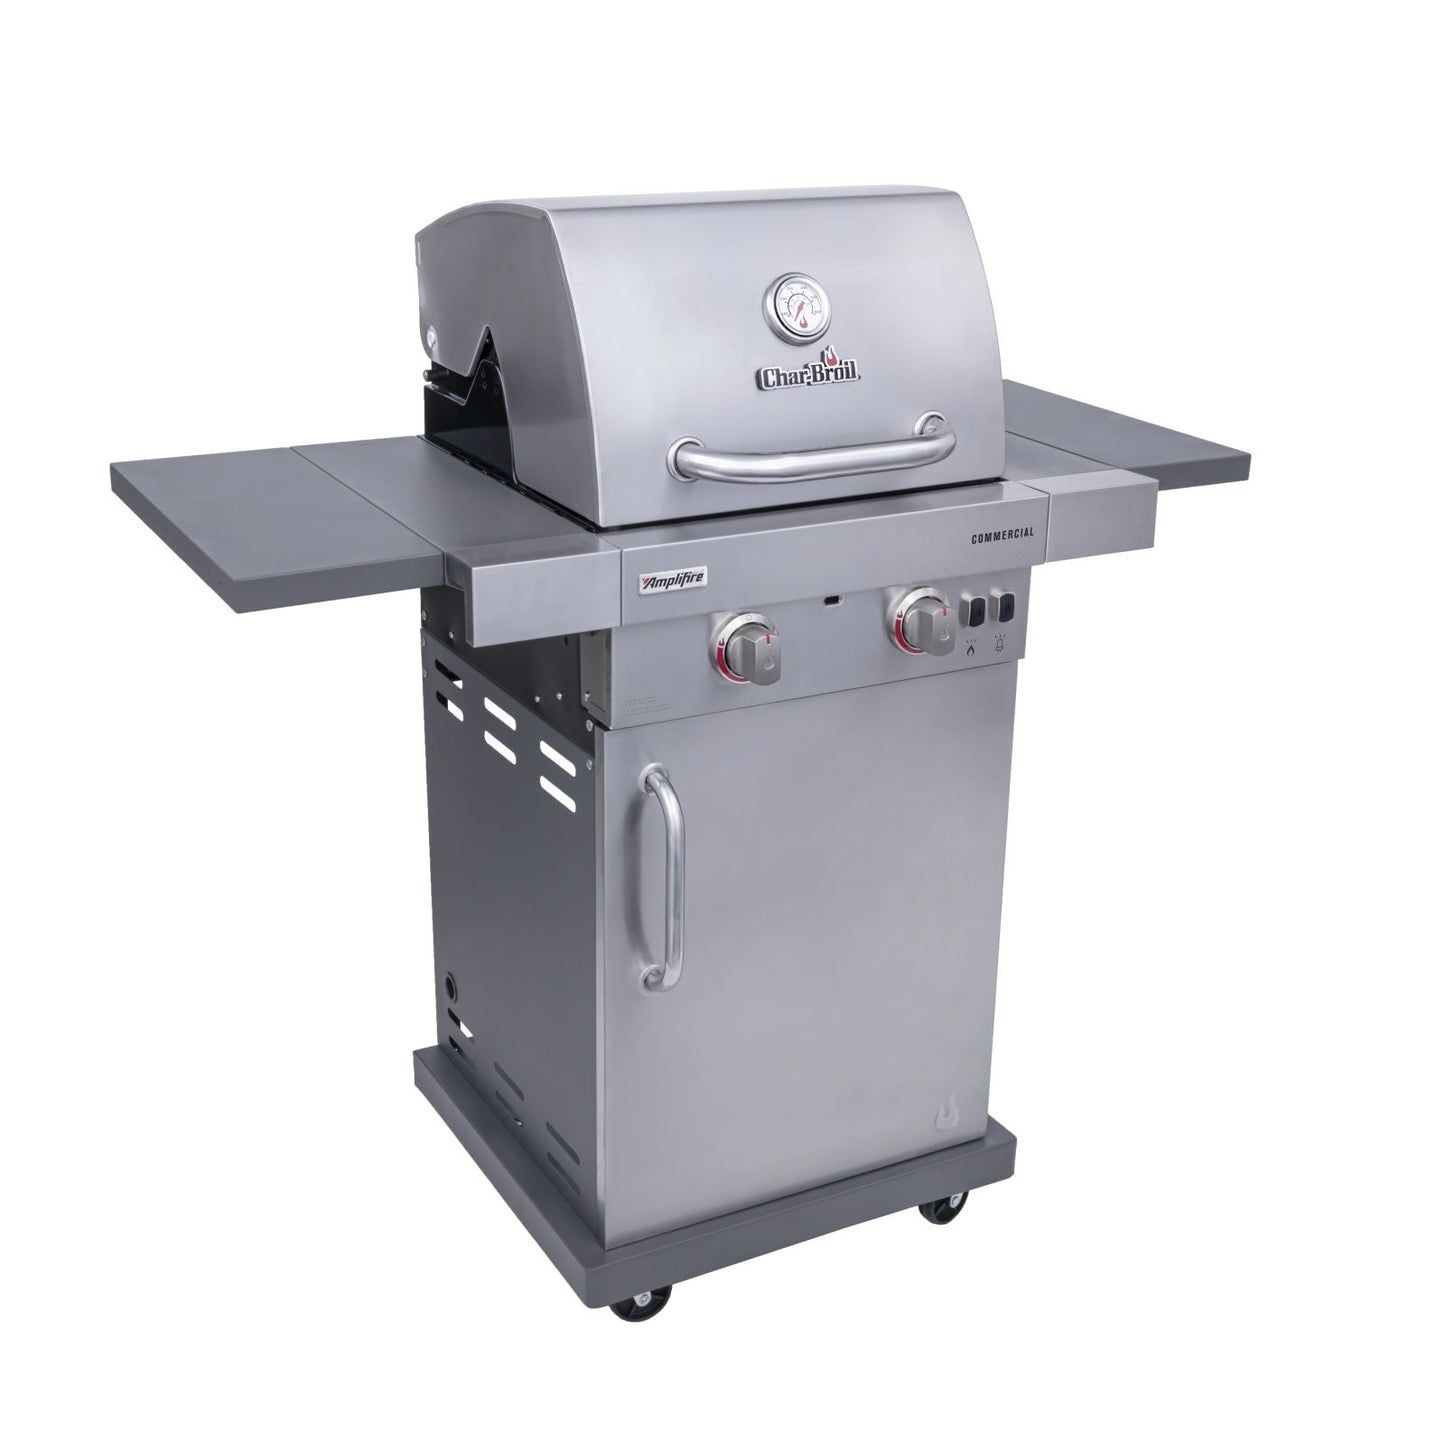 The Char-Broil® COMMERCIAL SERIES™ AMPLIFIRE™ 2-BURNER GAS GRILL